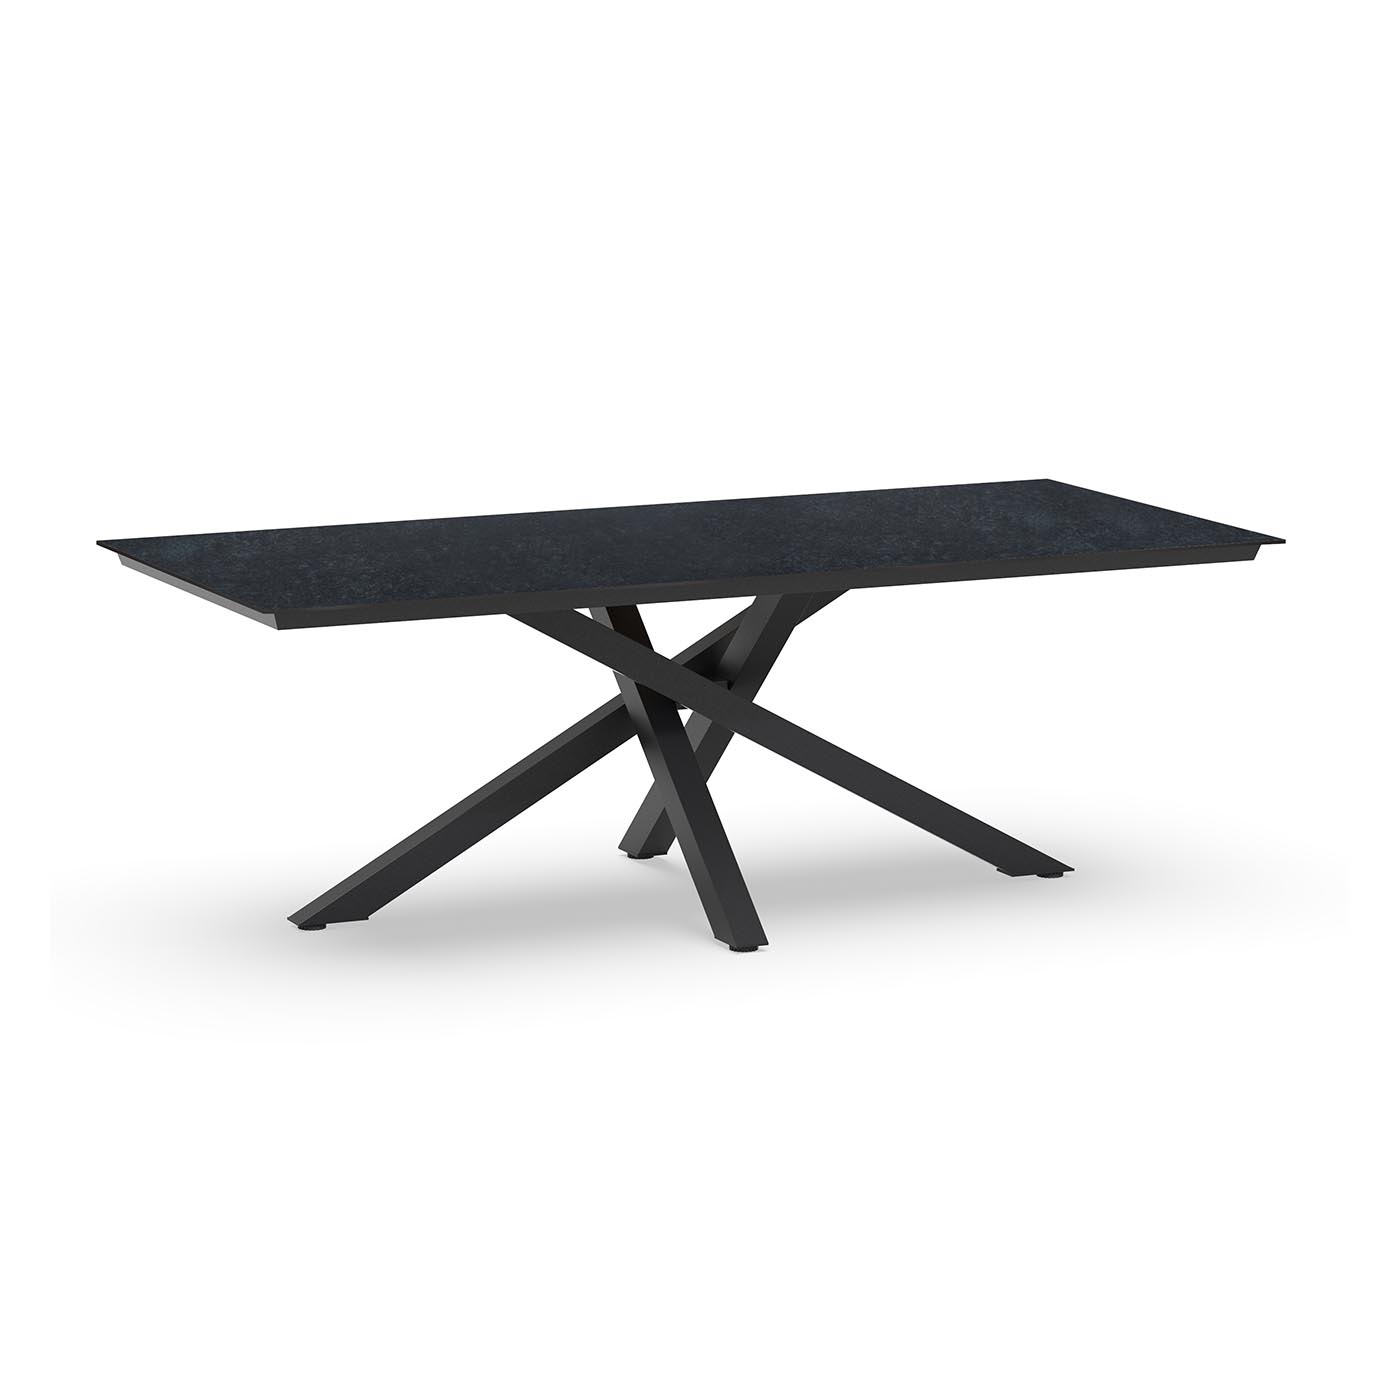 Orion Dining Table Trespa Graphite 220 x 100 cm Charcoal